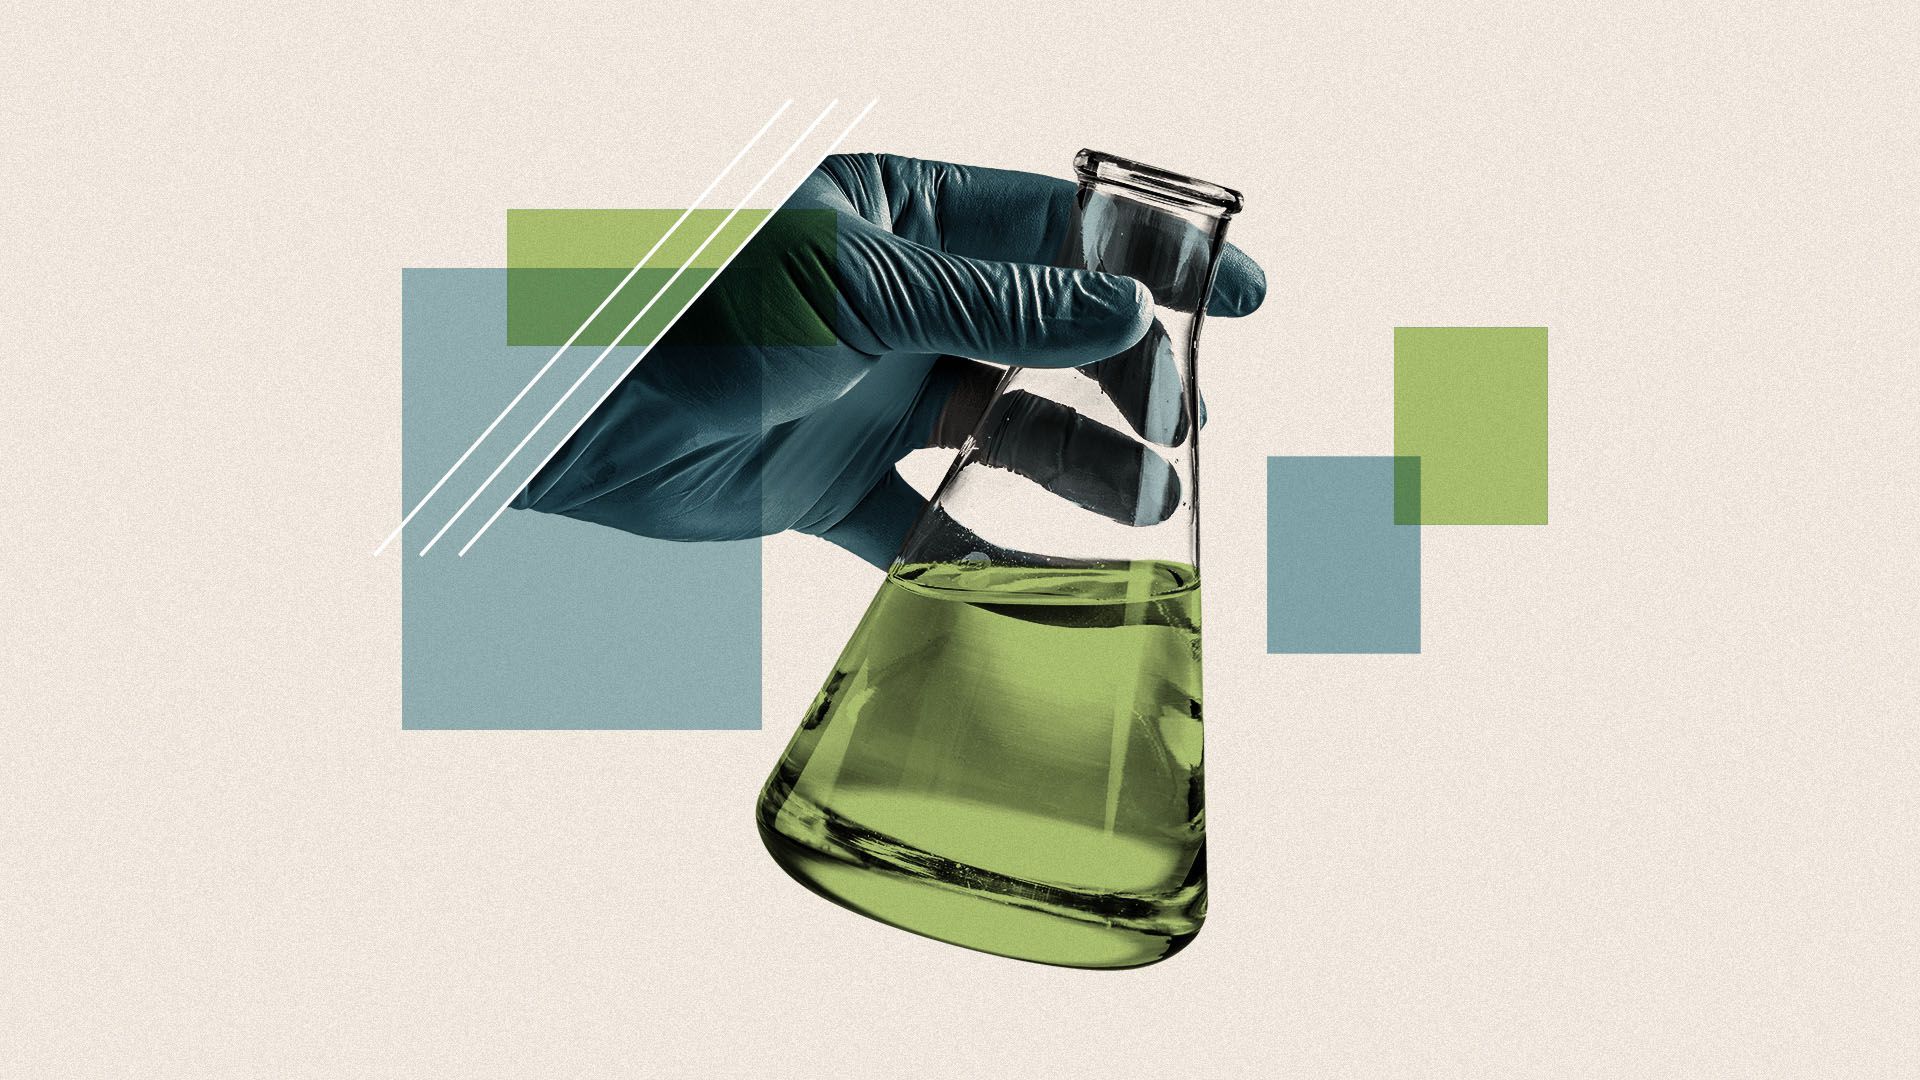 Illustration of a hand holding a Erlenmeyer flask.